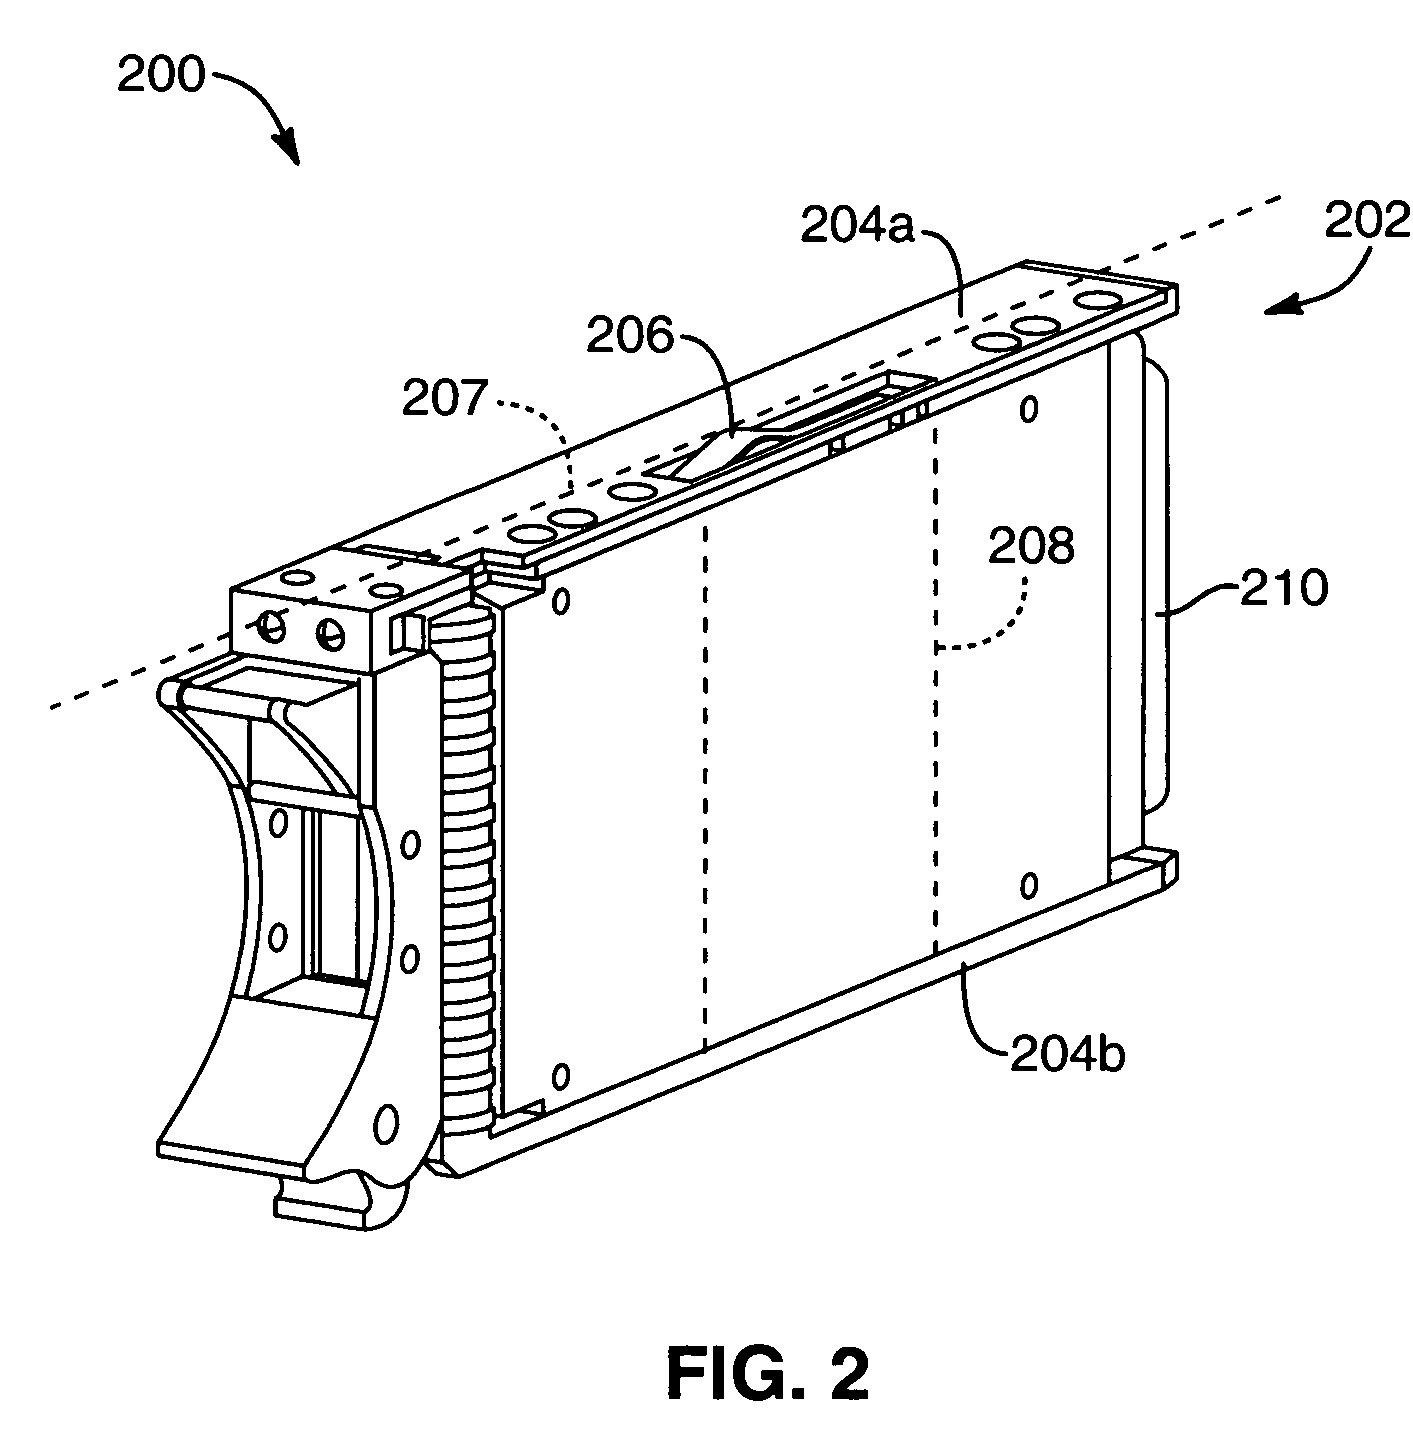 Apparatus, system, and method for reducing rotational vibration transmission within a data storage system